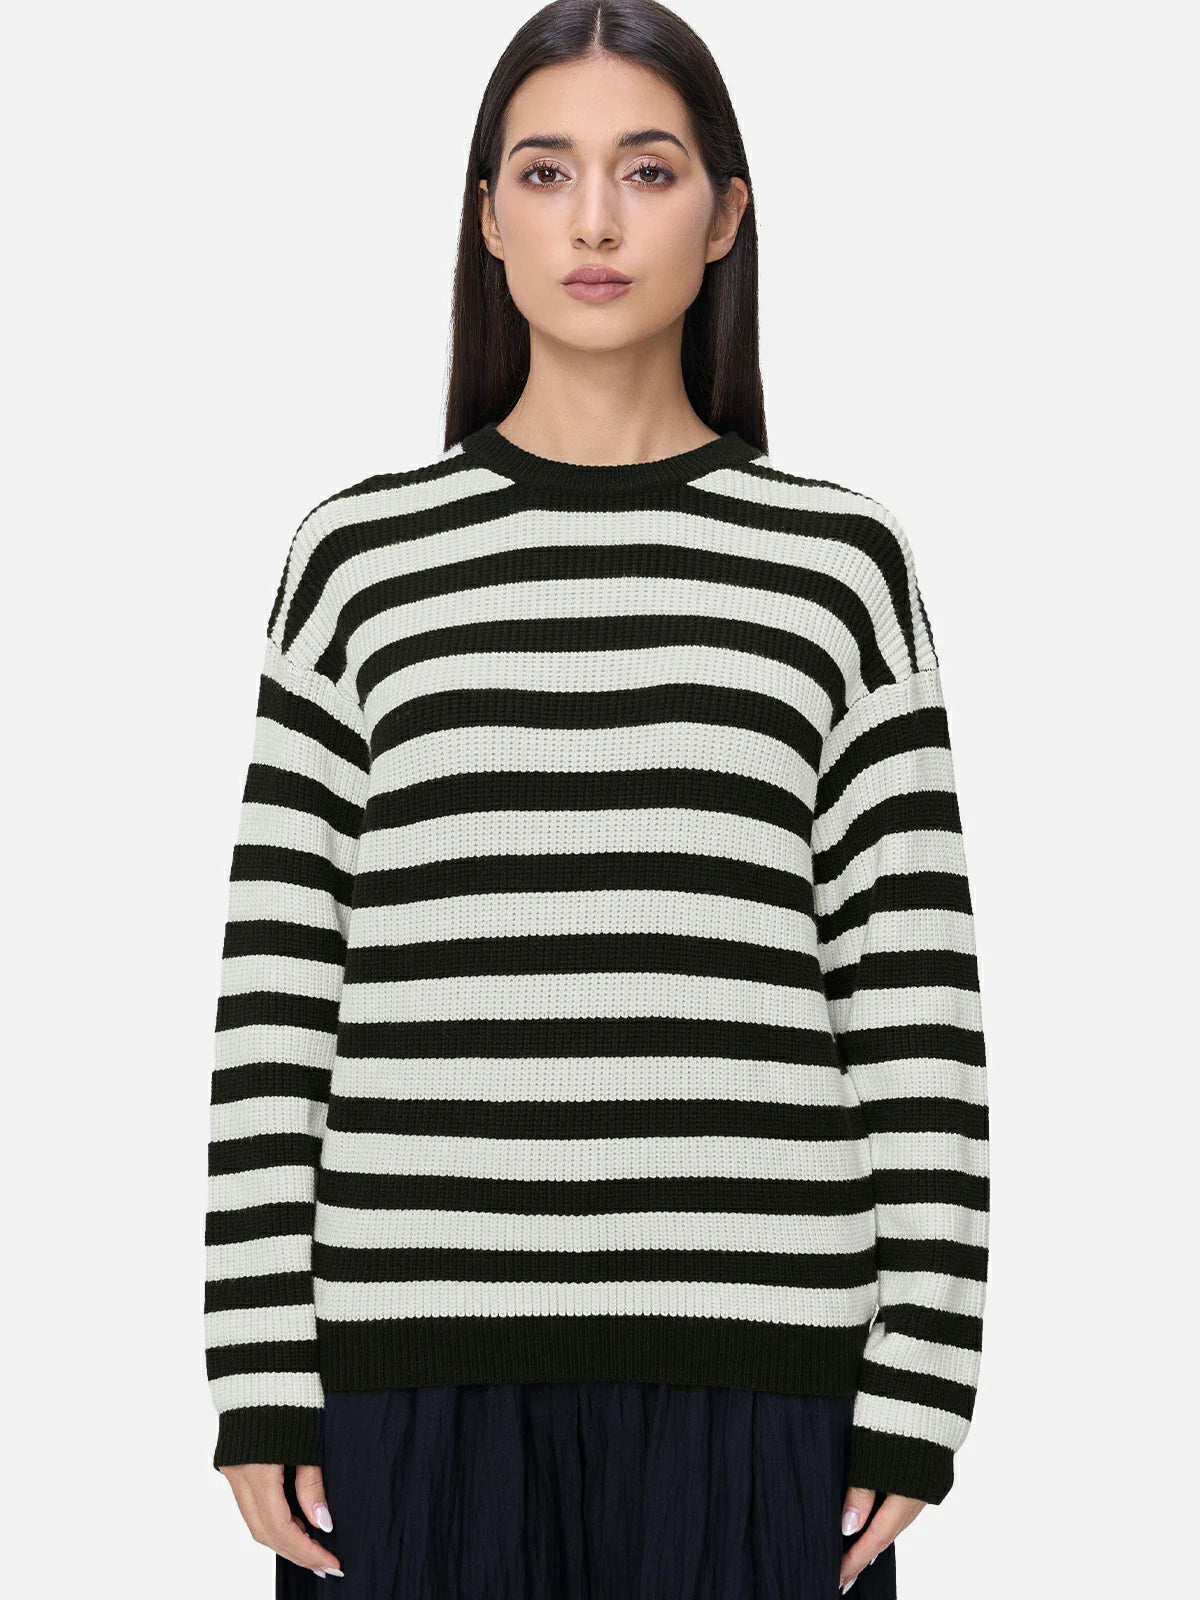 Chic Black and White Striped Ribbed Sweater with Round Neck